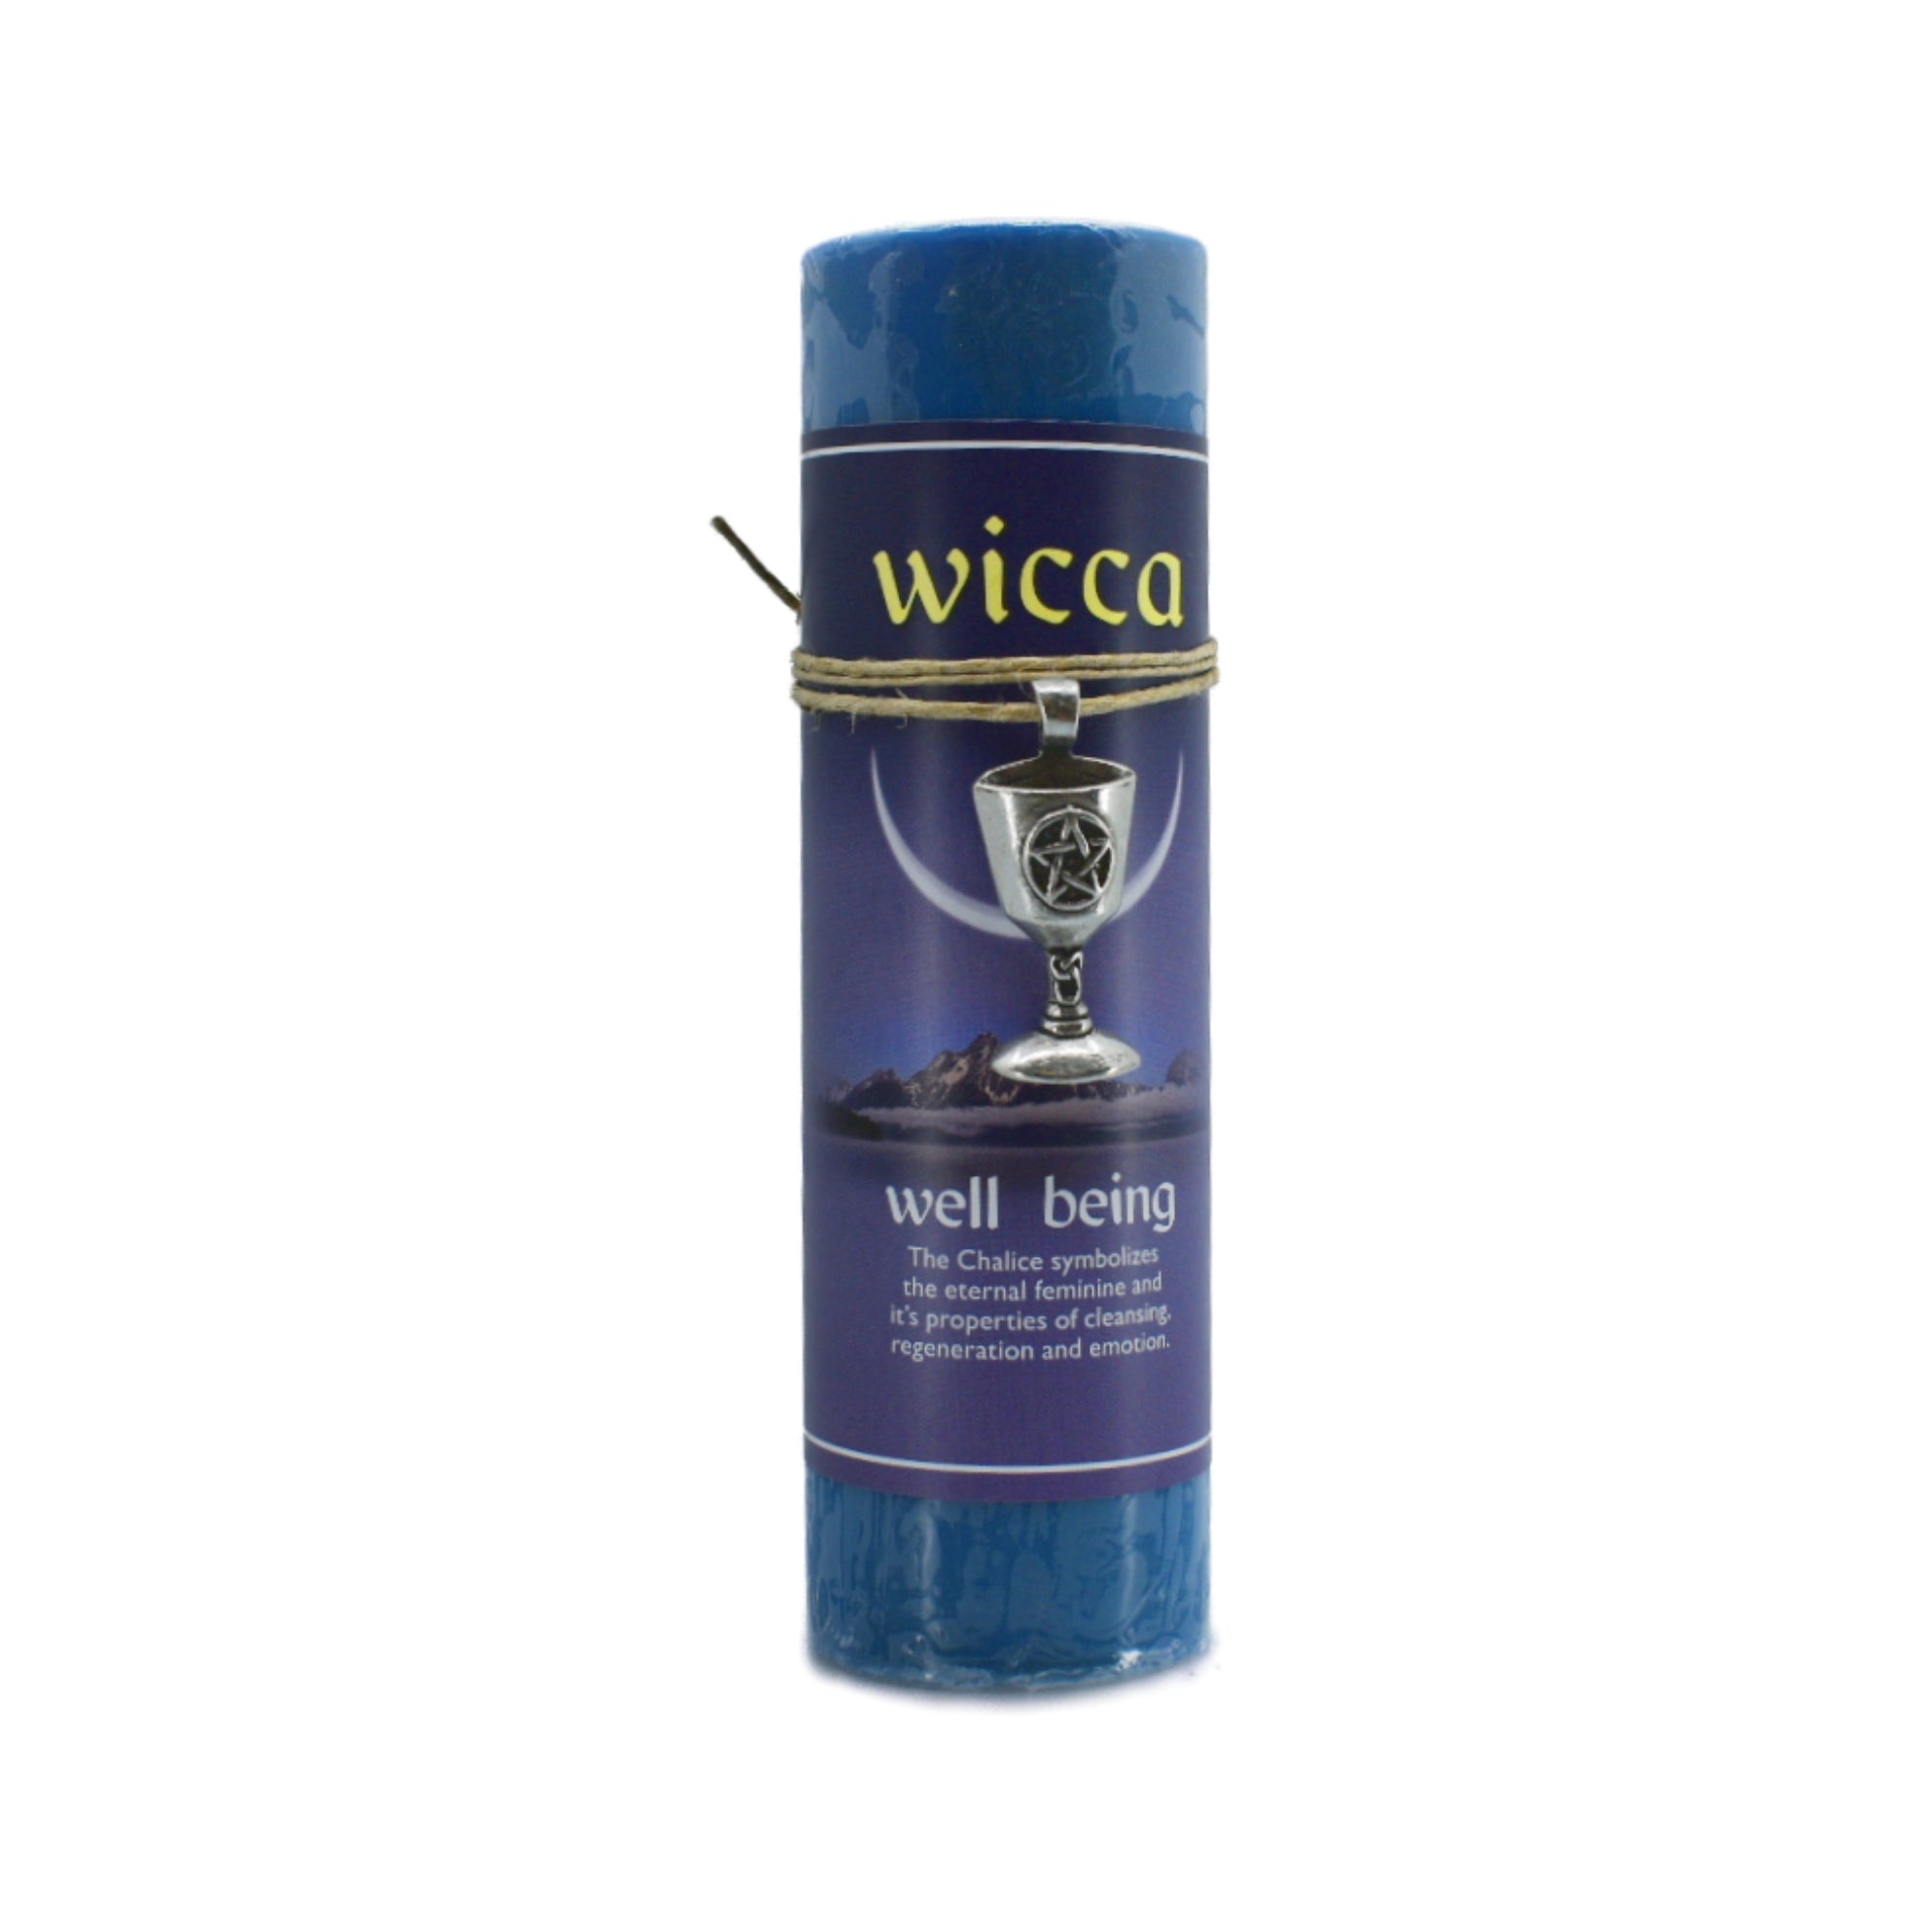 Well Being Wicca Pendant Candle.  The Chalice pewter pendant attached to the blue candle can be worn as a necklace or used as an amulet.  The chalice symbolizes the eternal feminine and its properties of cleansing, regeneration and emotion.